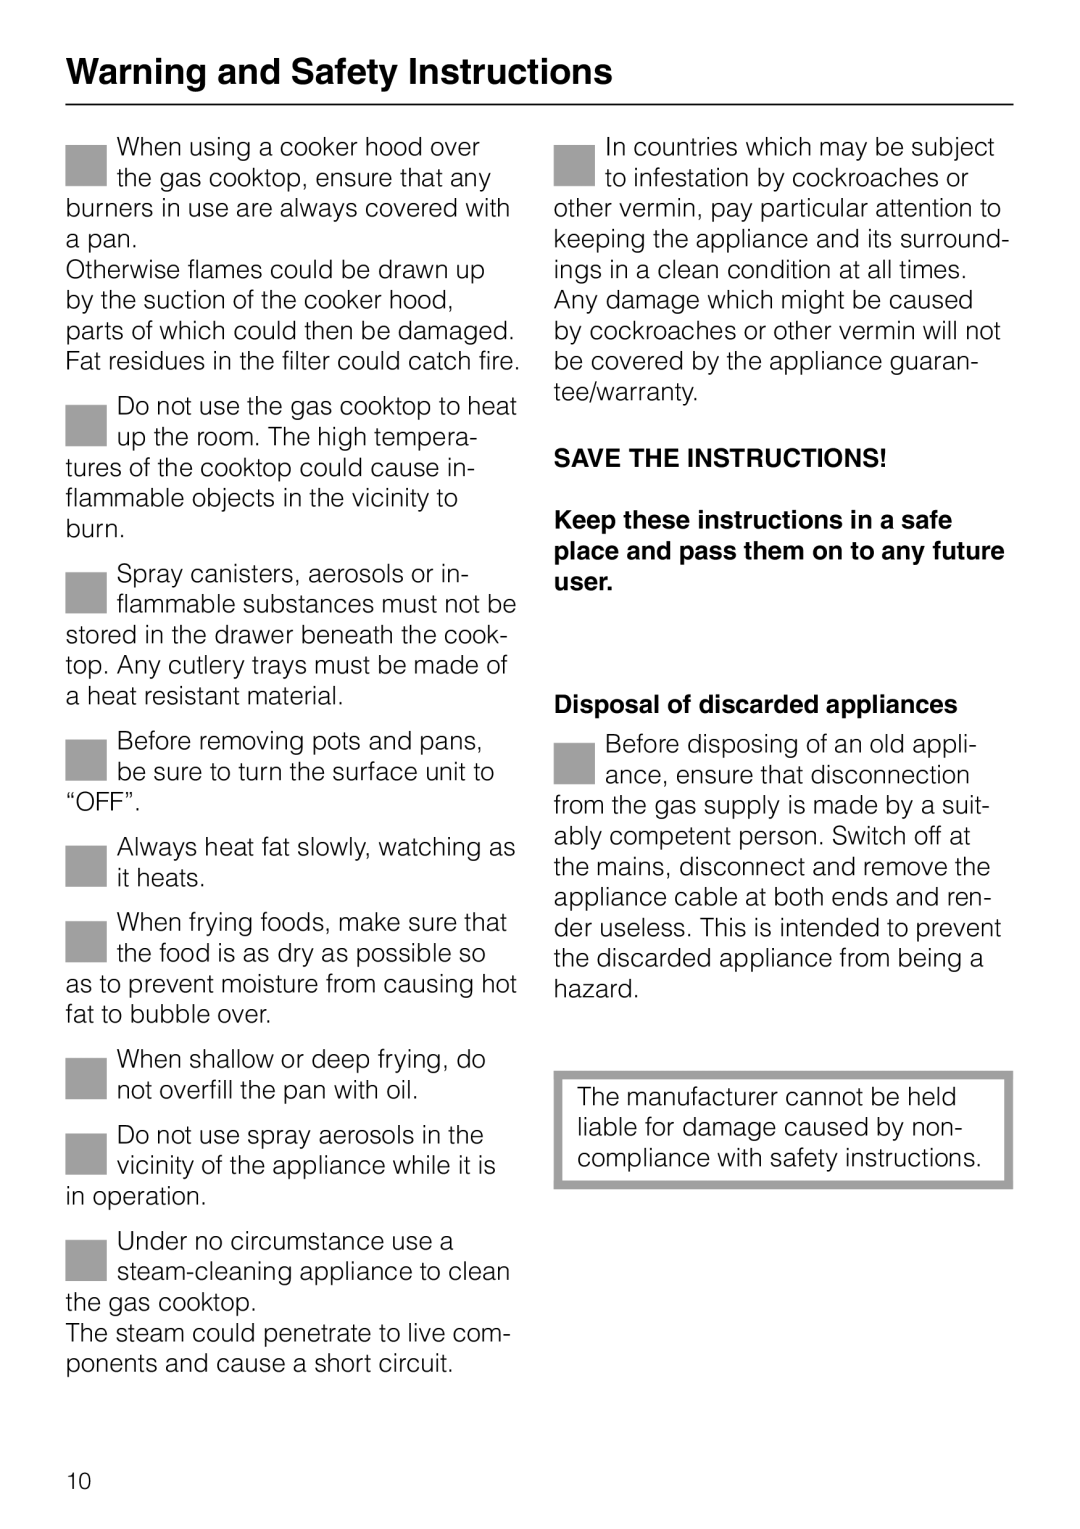 Miele KM 81-2 Save The Instructions, Disposal of discarded appliances, Warning and Safety Instructions 